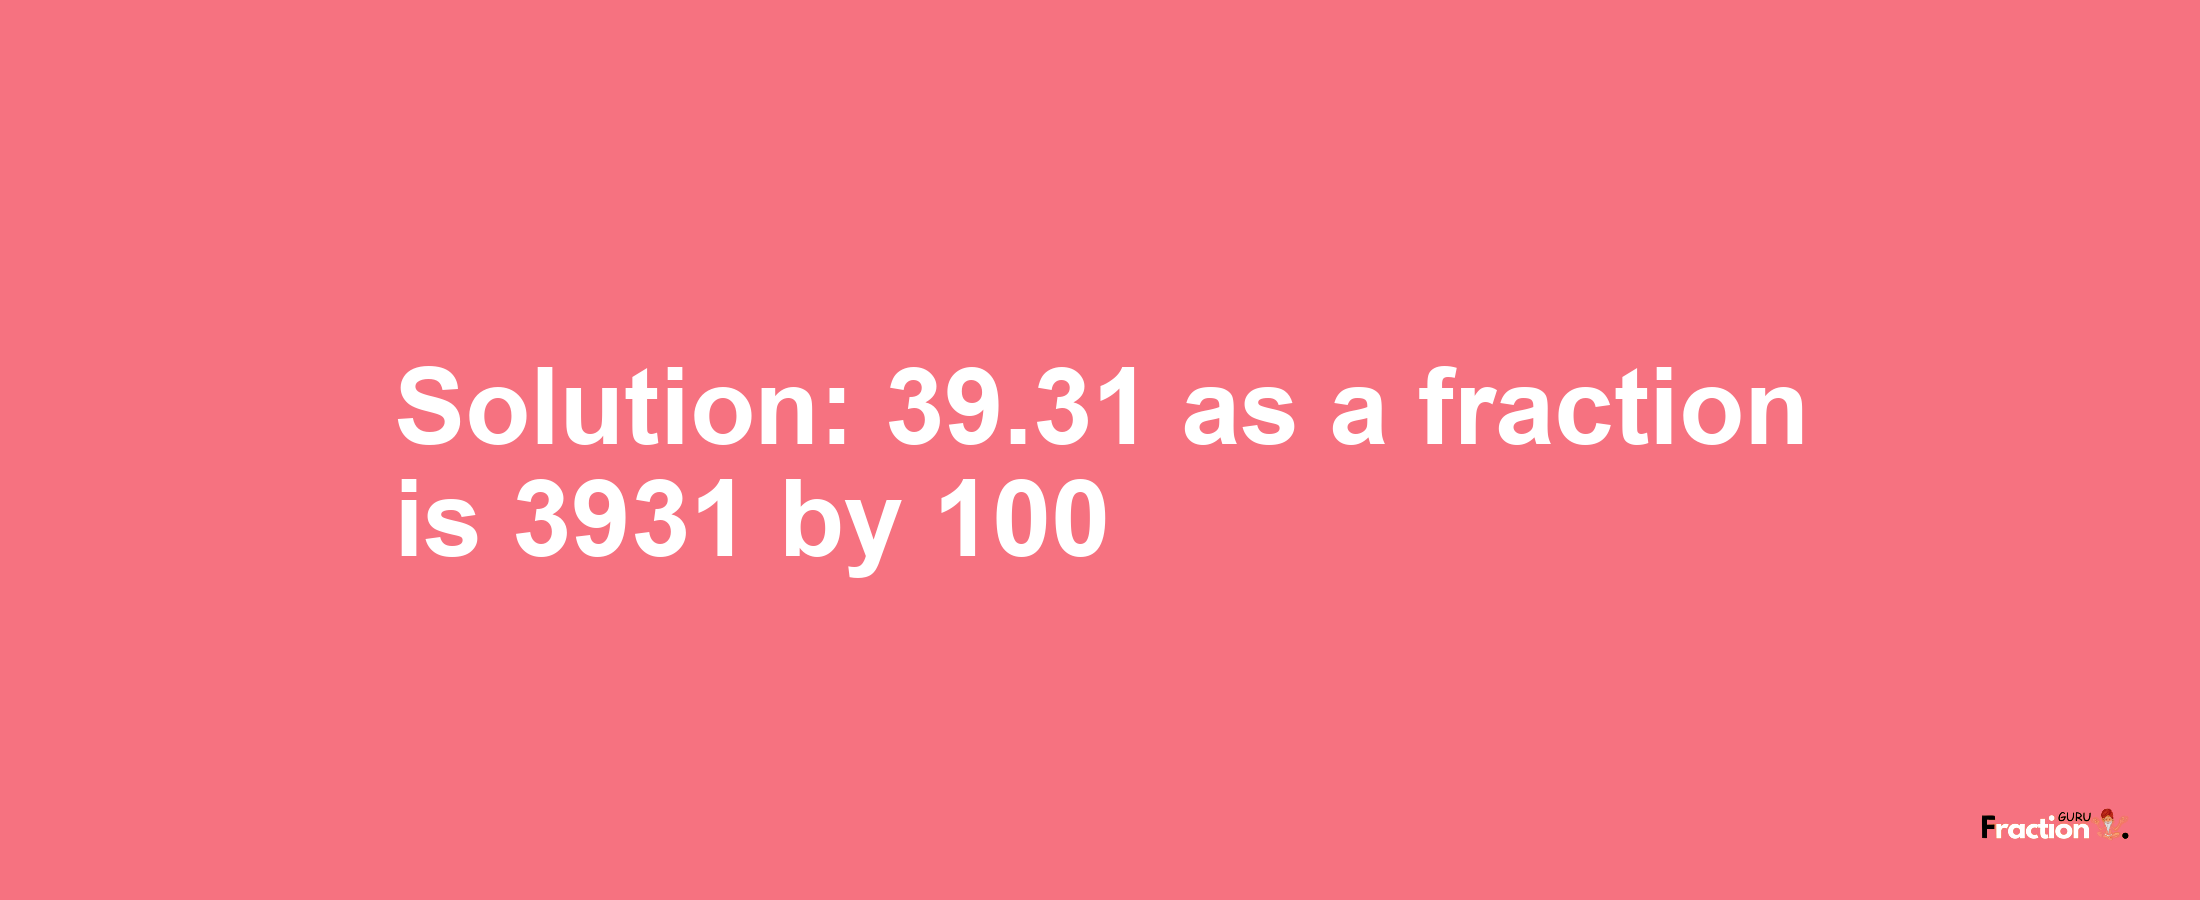 Solution:39.31 as a fraction is 3931/100